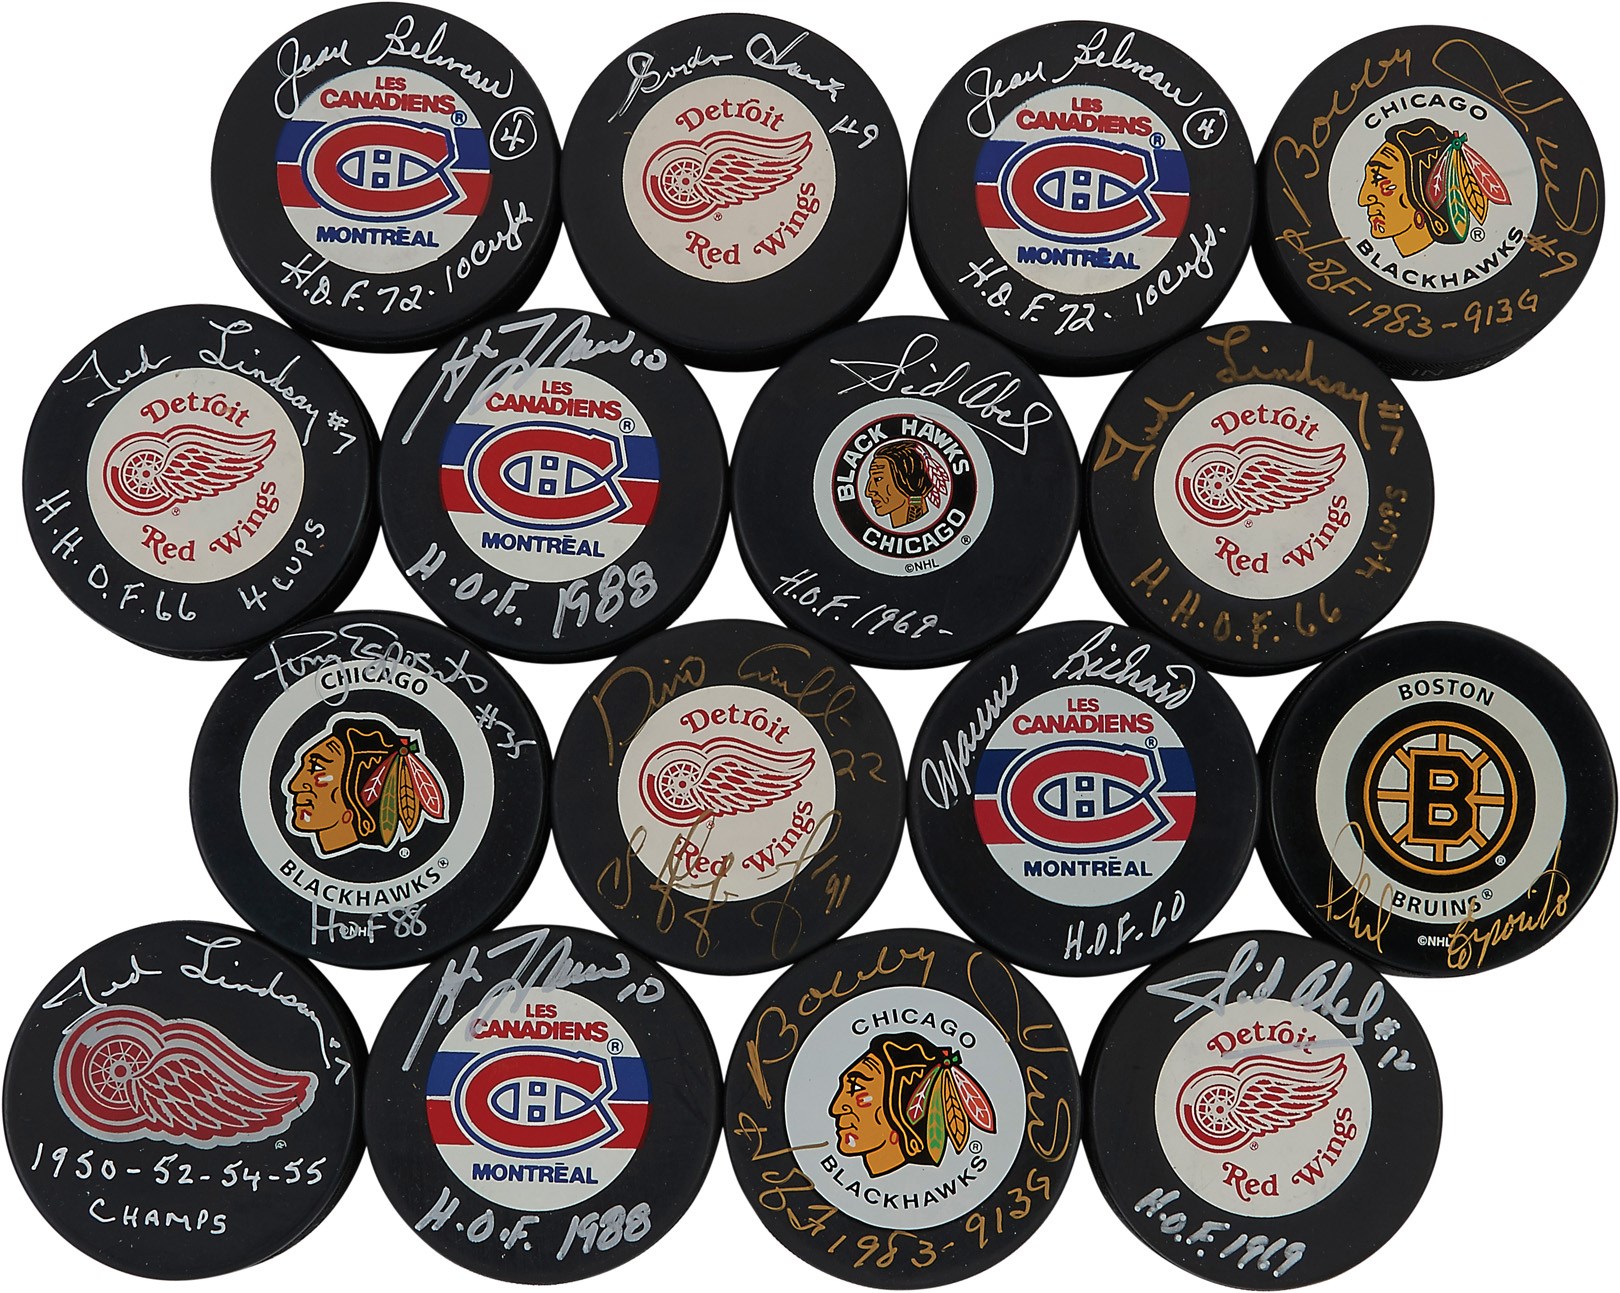 Hockey - Massive Hockey HOFers & Legends Signed Puck Collection with Inscriptions (140+)